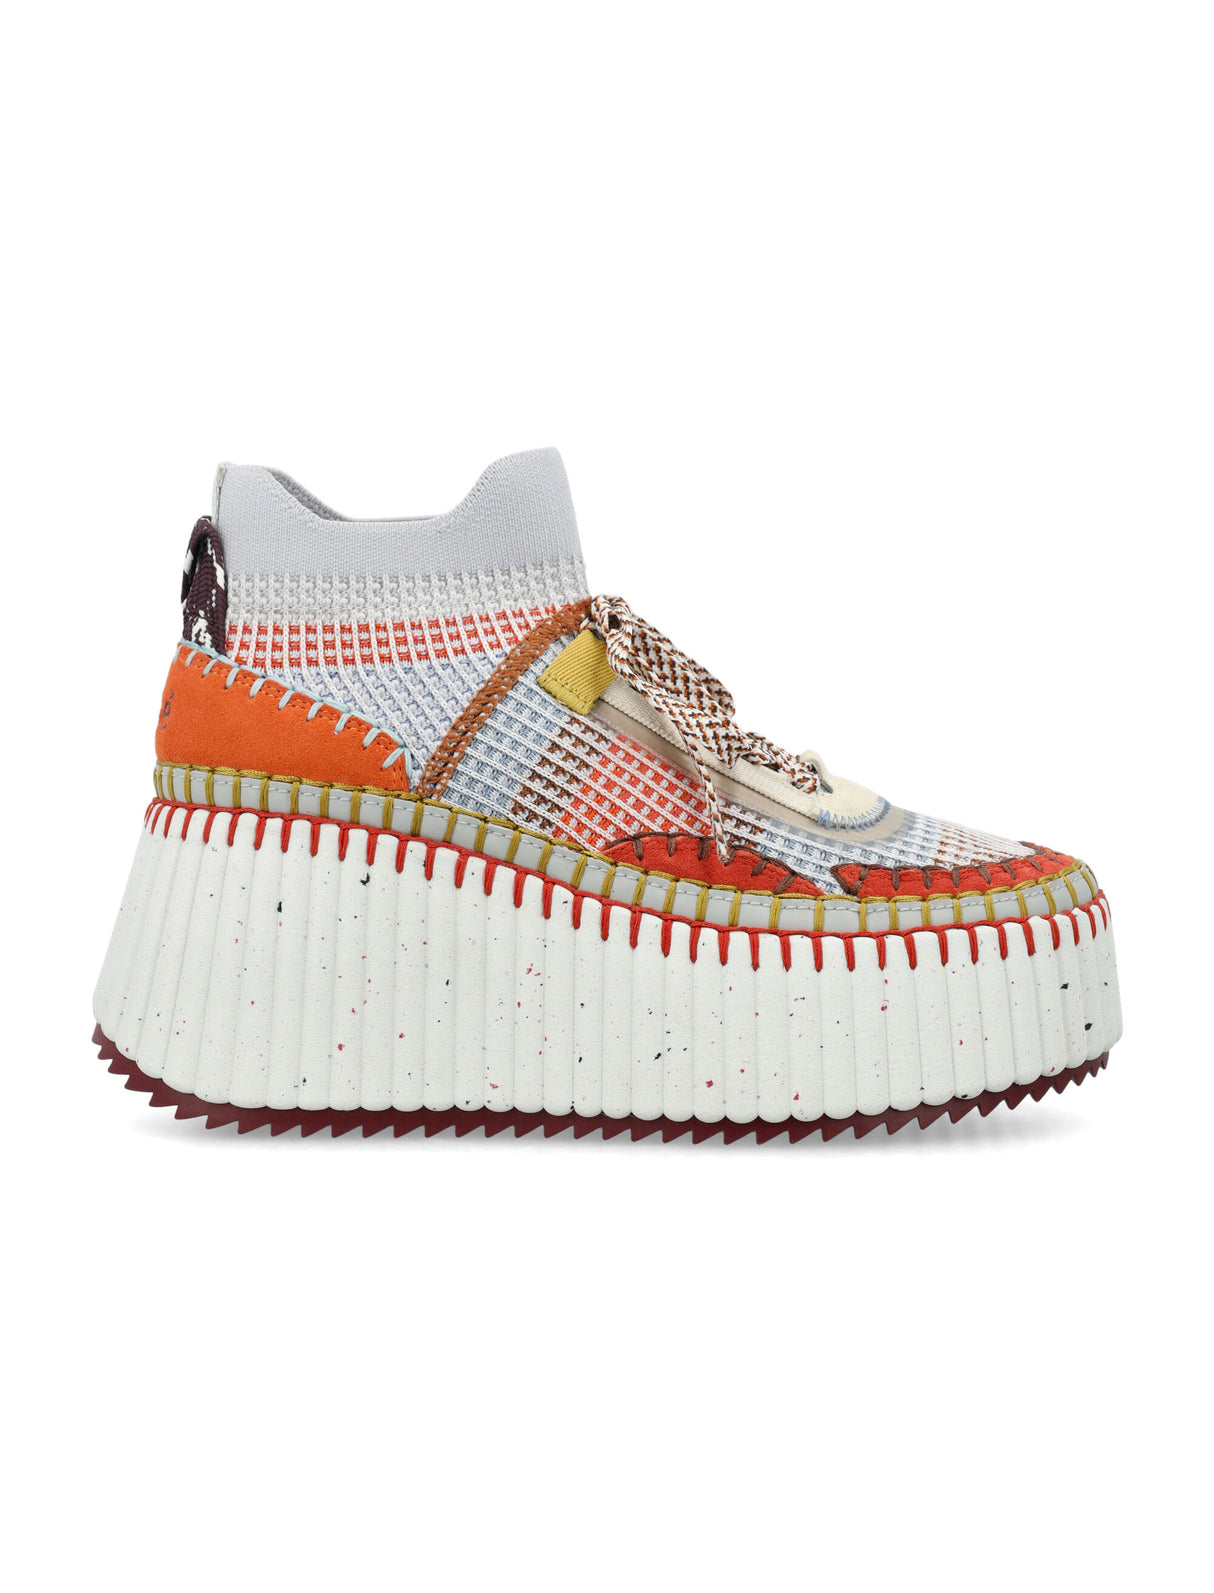 CHLOÉ Double Sole Sneakers for Women - Hand-Stitched Mesh Upper, Lace-Up Fastening, Orange